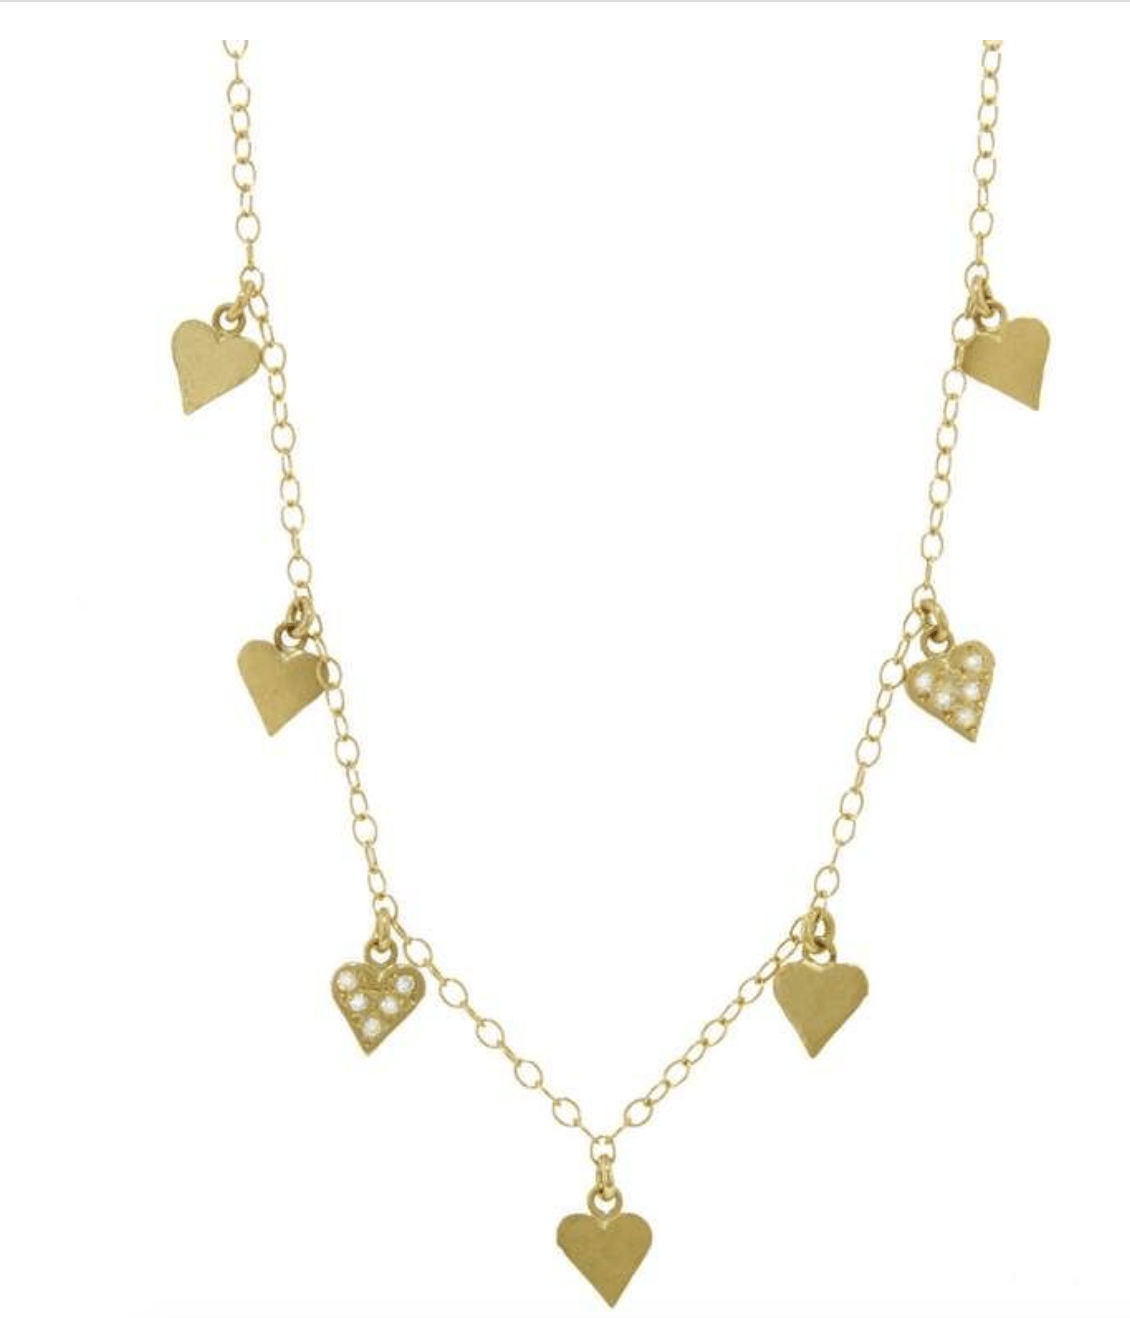 Image of 14 Kt and Diamonds 7 Hearts Necklace (Back in stock!)